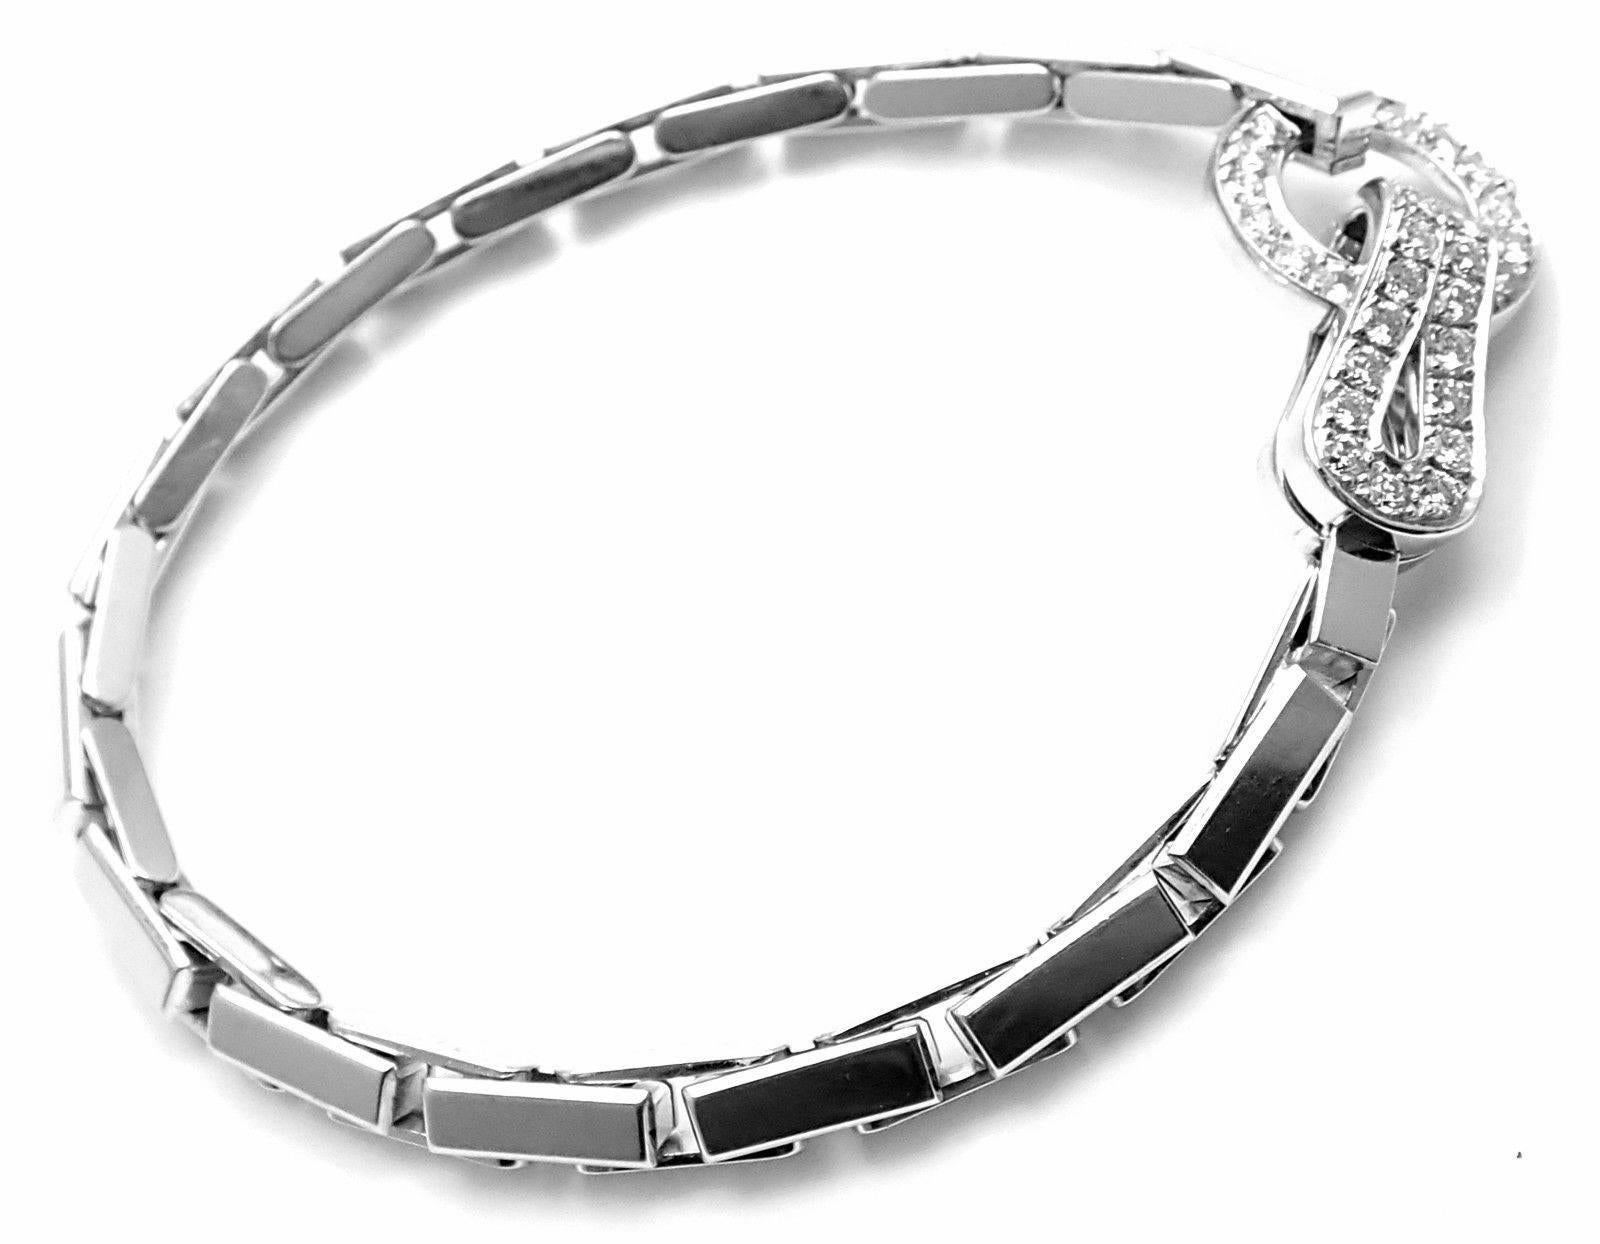 18k White Gold Diamond Agrafe Bracelet by Cartier.
With 35 round brilliant cut diamonds G color, VVS1 clarity total weight approx. 1.25ct
Details:
Length: 7 1/4